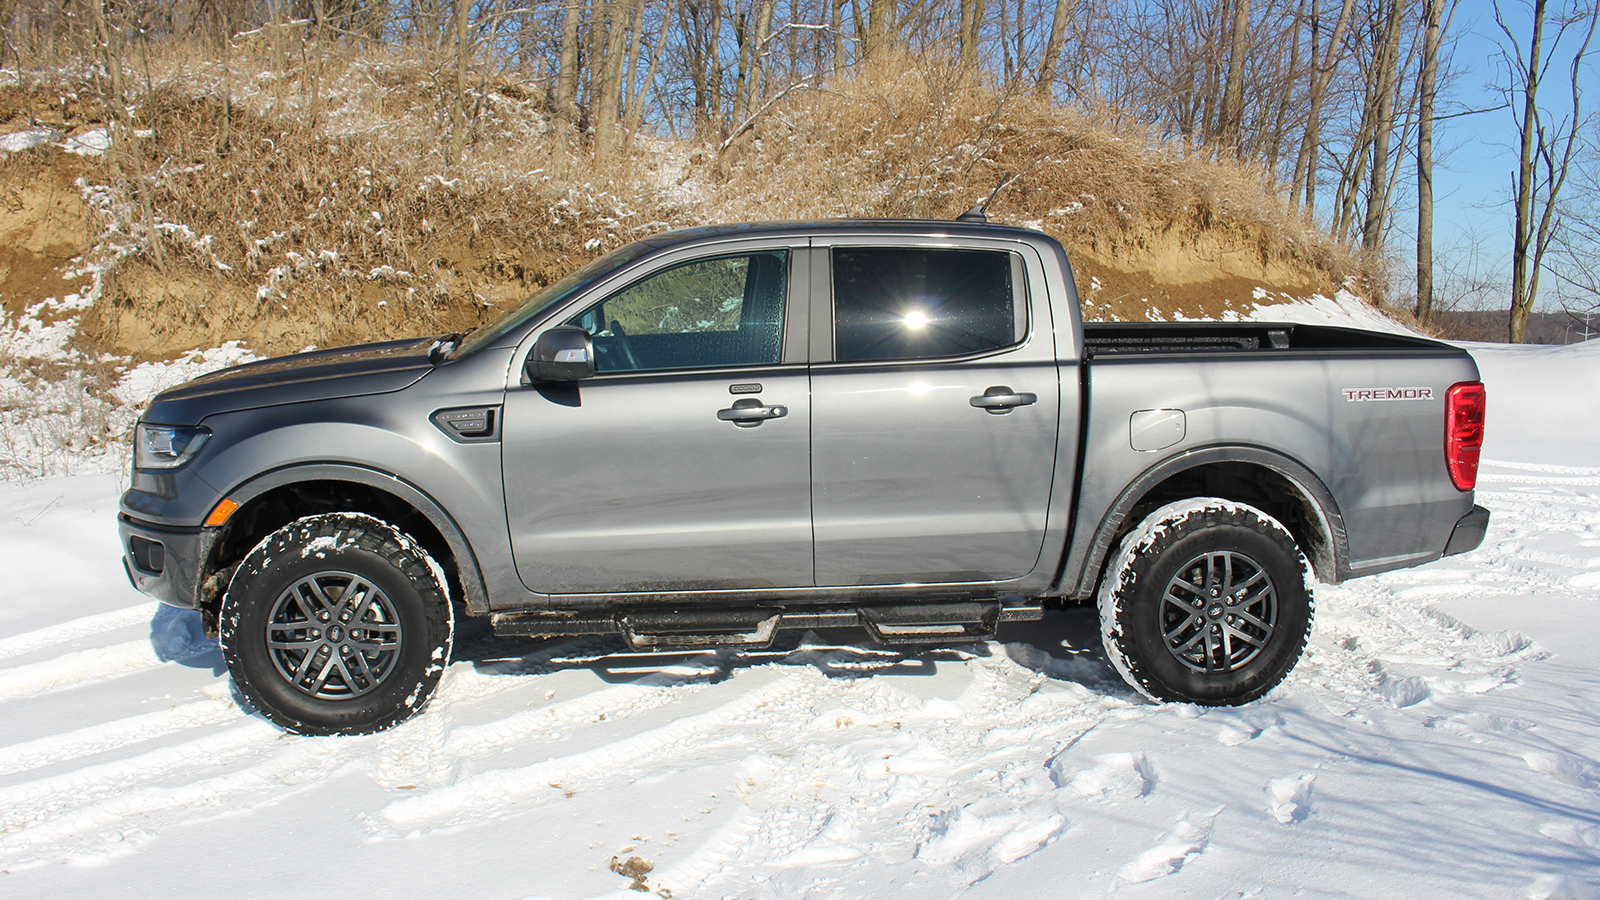 2021 Ford Ranger Tremor First Drive What's new, offroading, features